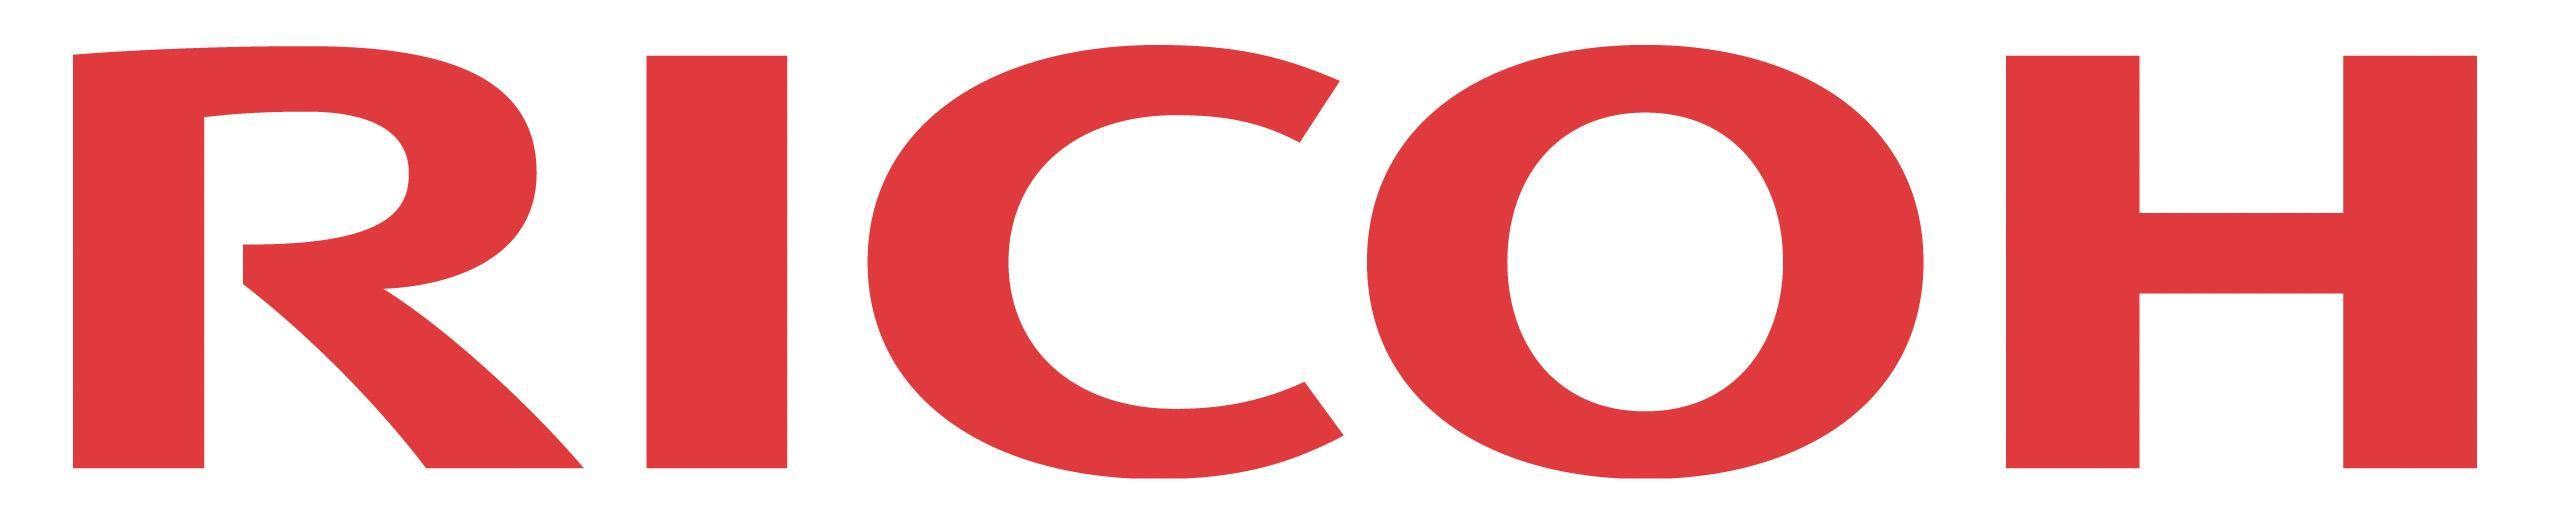 New Ricoh Logo - Picture of Ricoh Logo